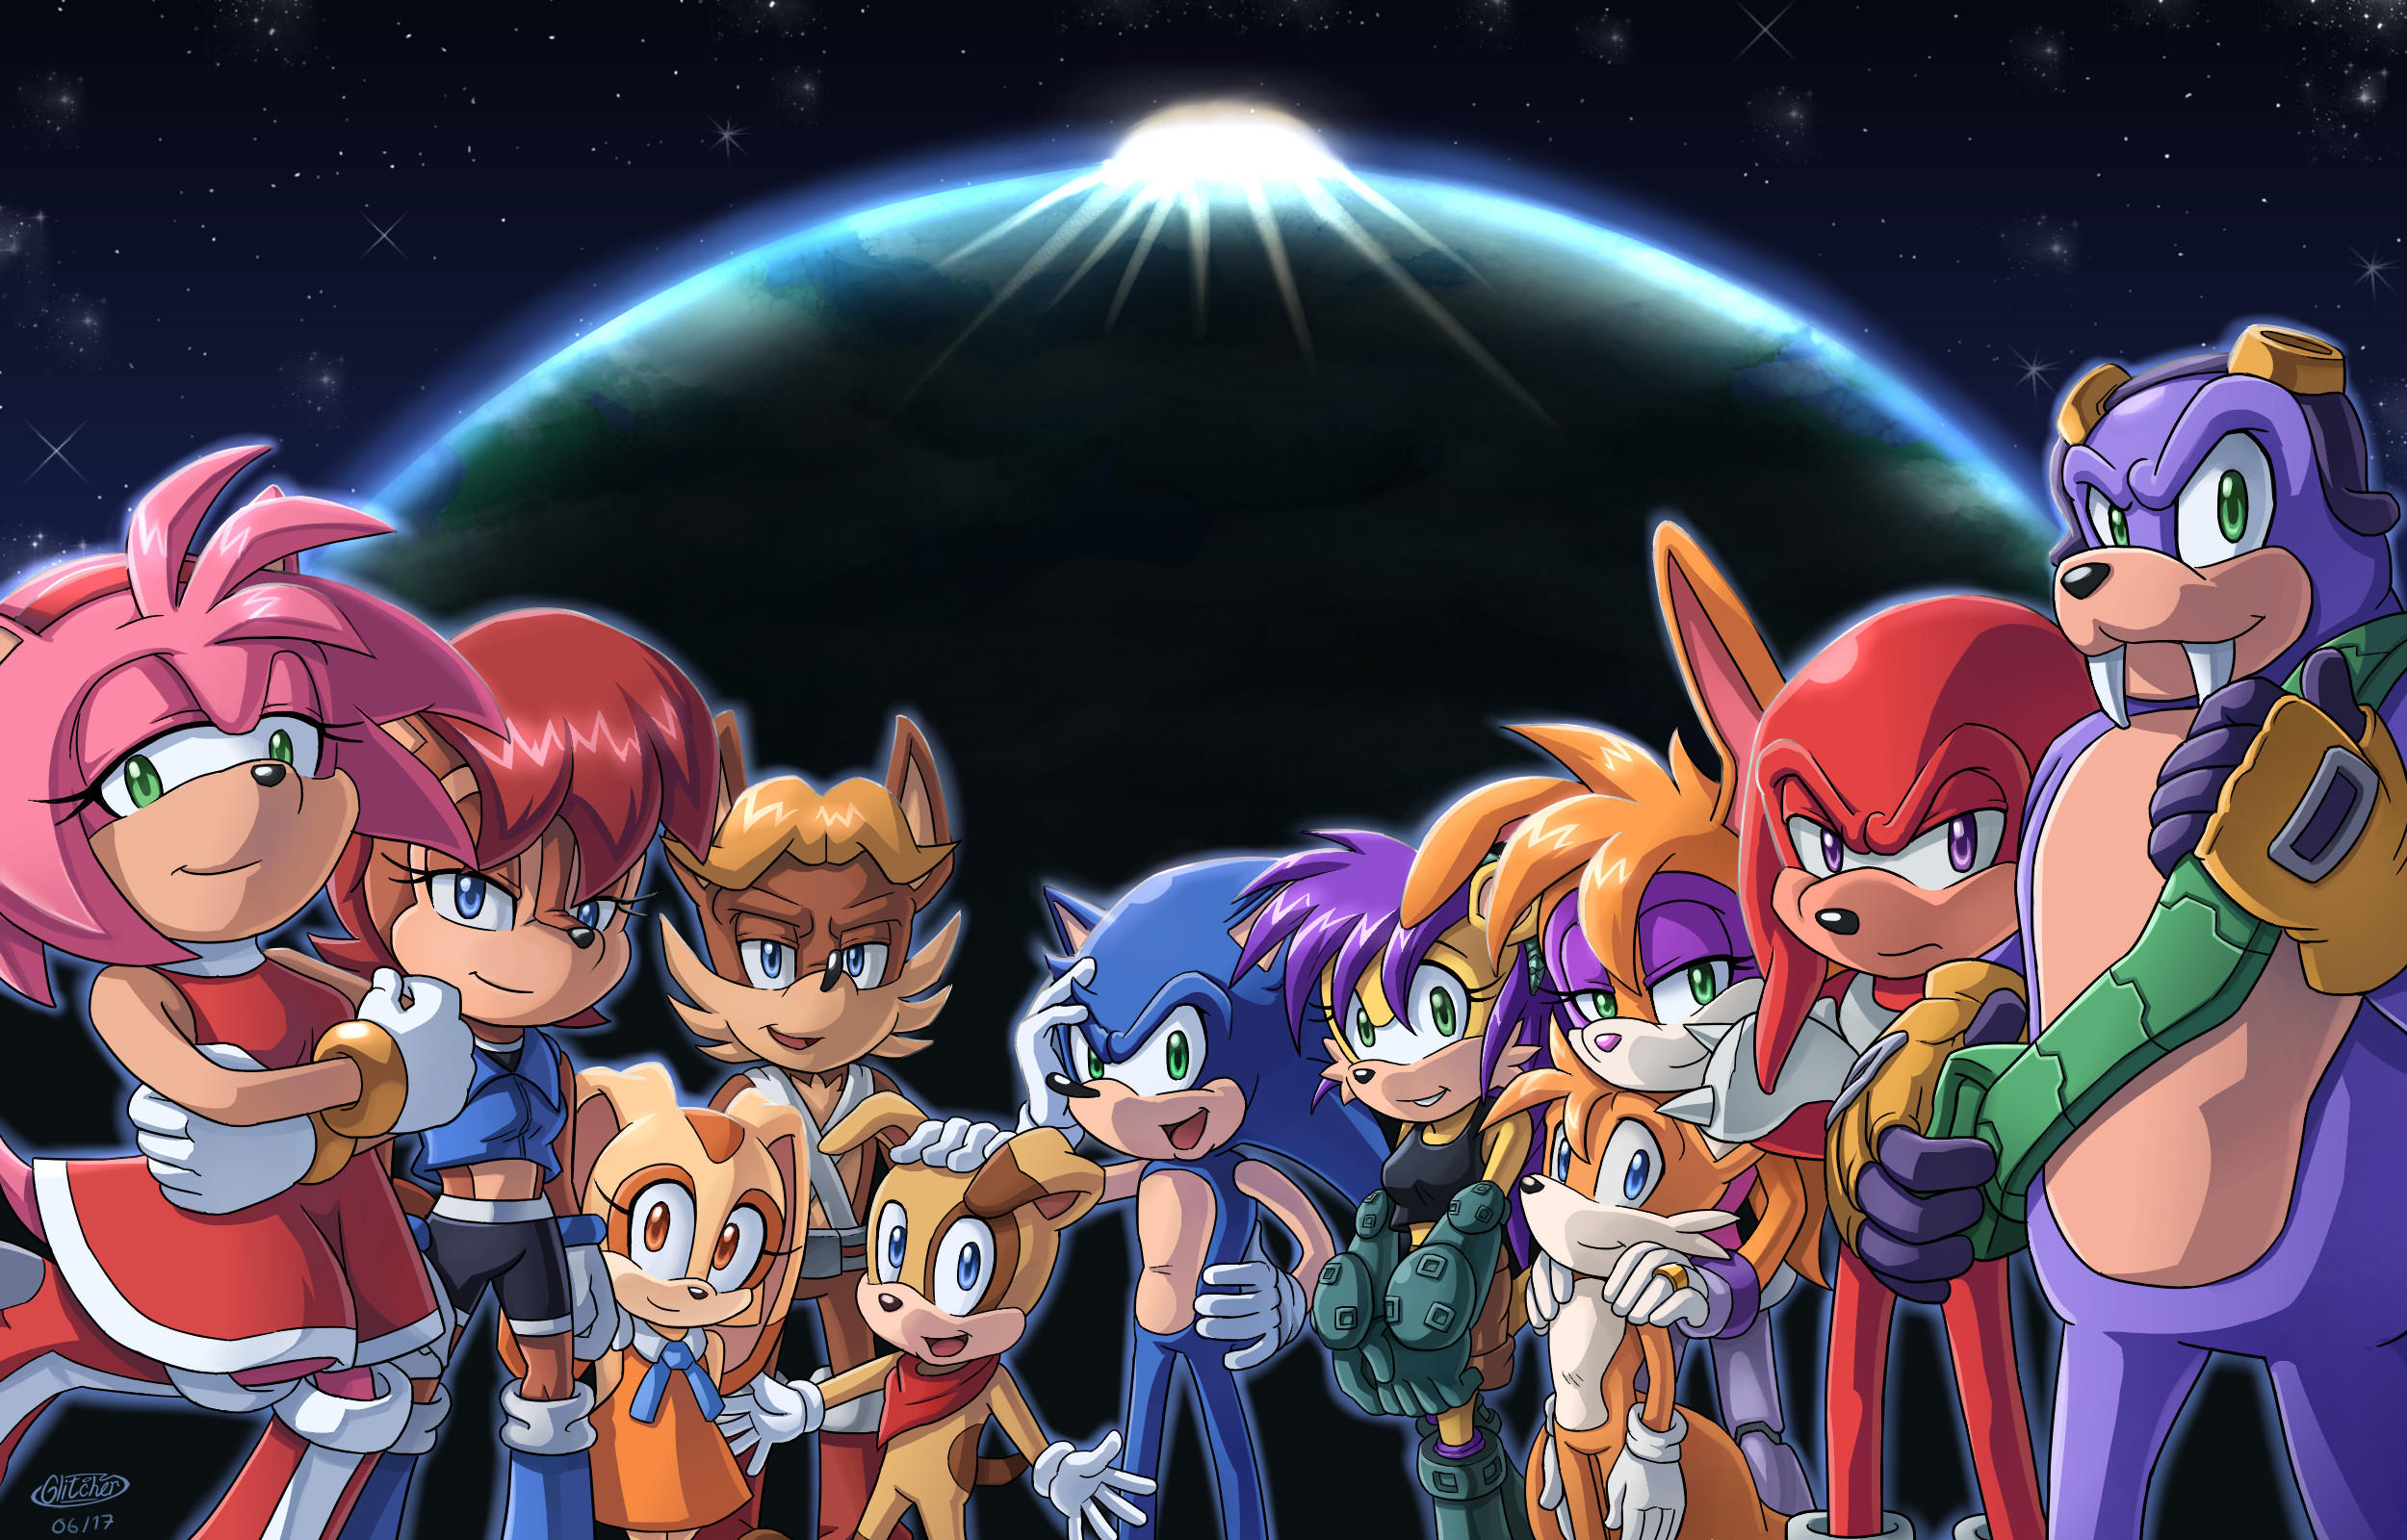 comics, sonic the hedgehog, amy rose, antoine d'coolette, ben muttski, bunnie rabbot, cream the rabbit, freedom fighters (sonic the hedgehog), knuckles the echidna, miles 'tails' prower, mina mongoose, rotor the walrus, sally acorn, sonic